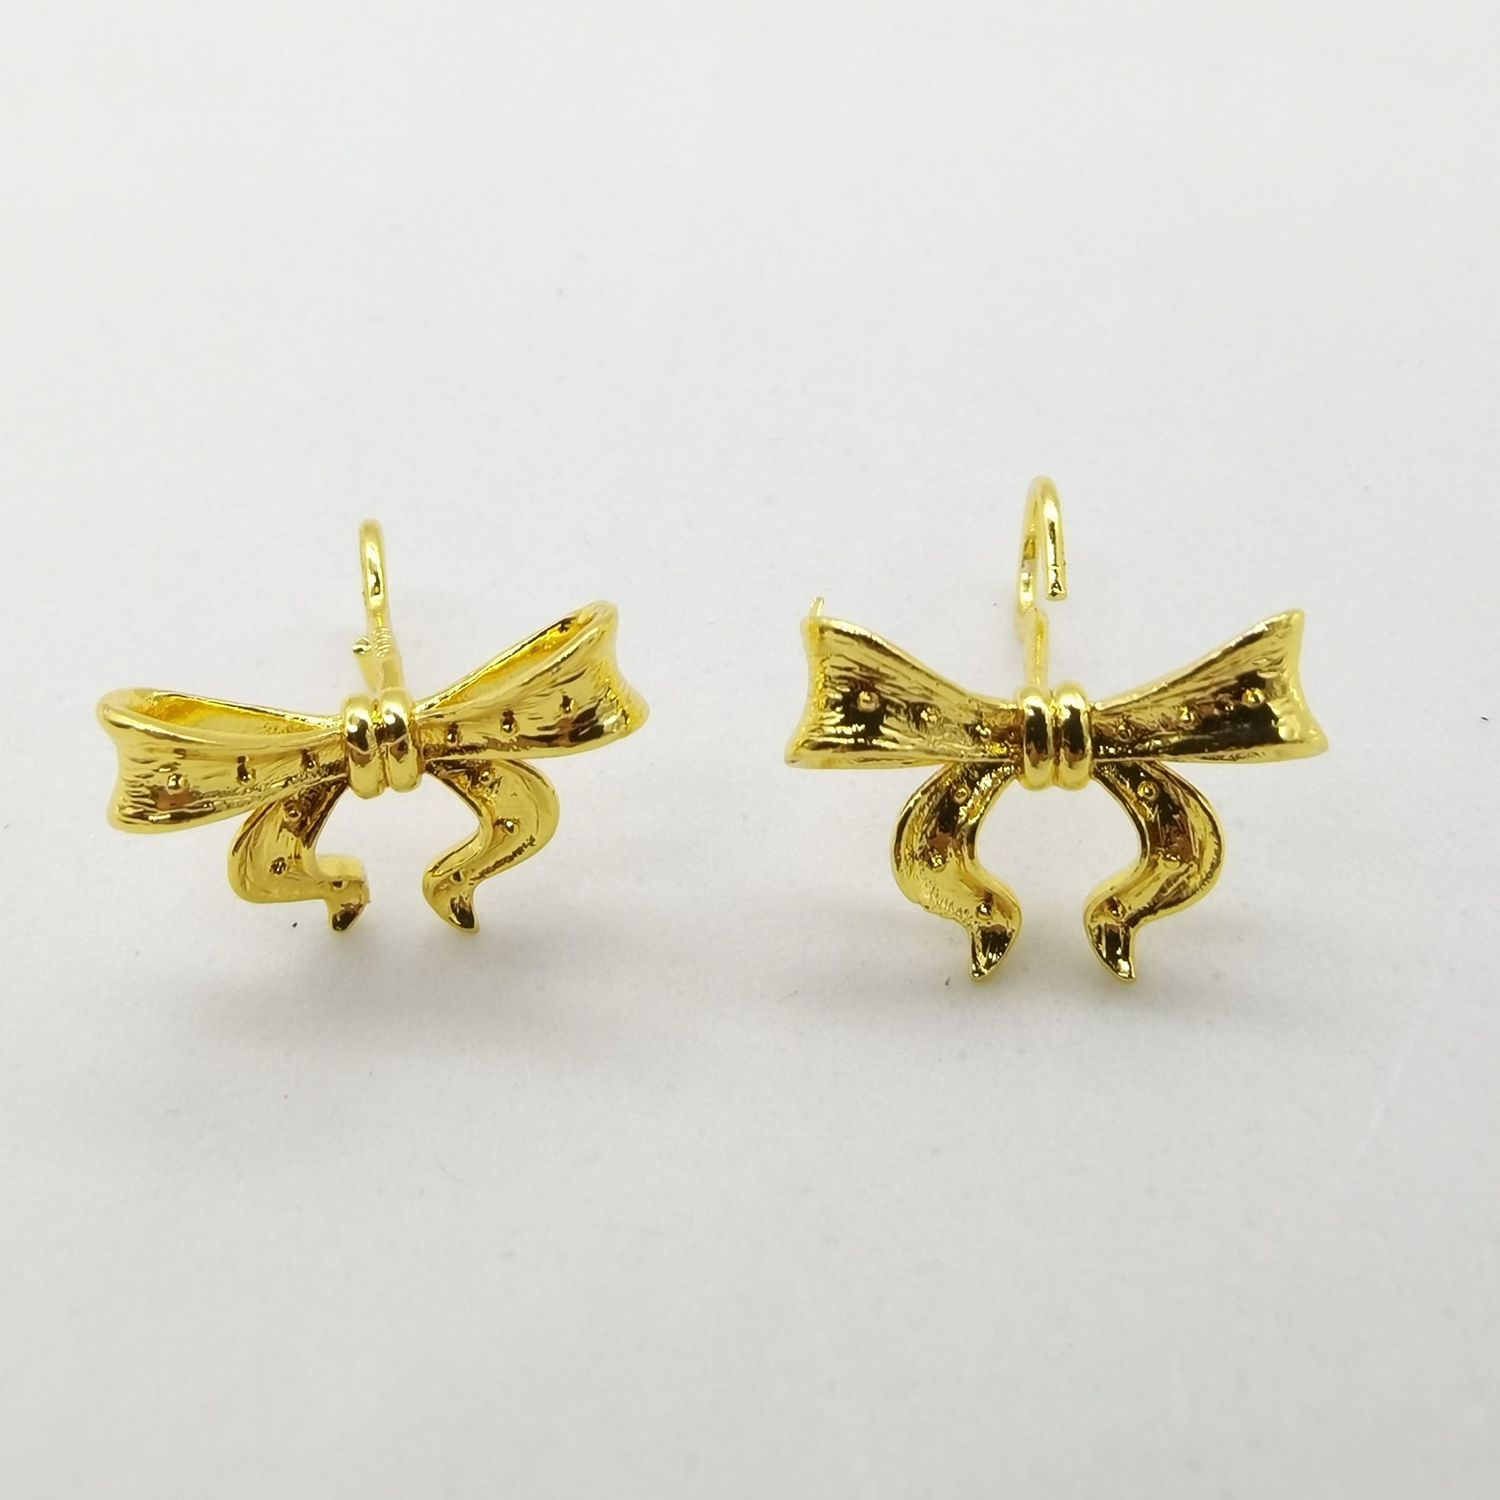 Alluvial gold vacuum electroplating 24K gold fugitive princess butterfly earrings